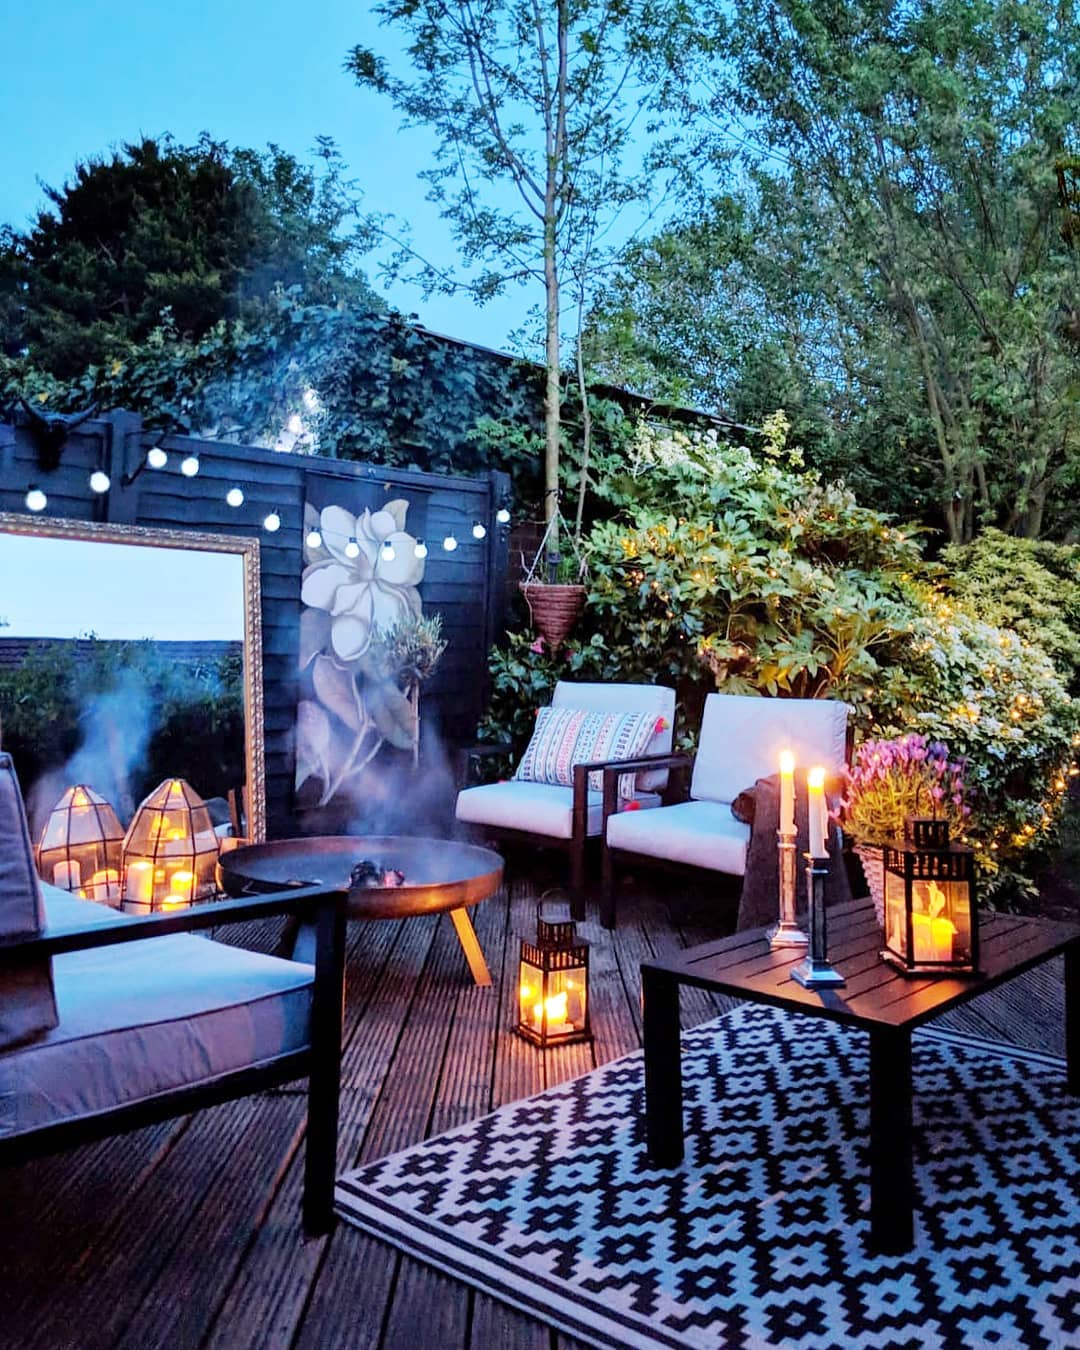 Backyard patio at night. Photo by Instagram user @marks_and_rowe_interiors